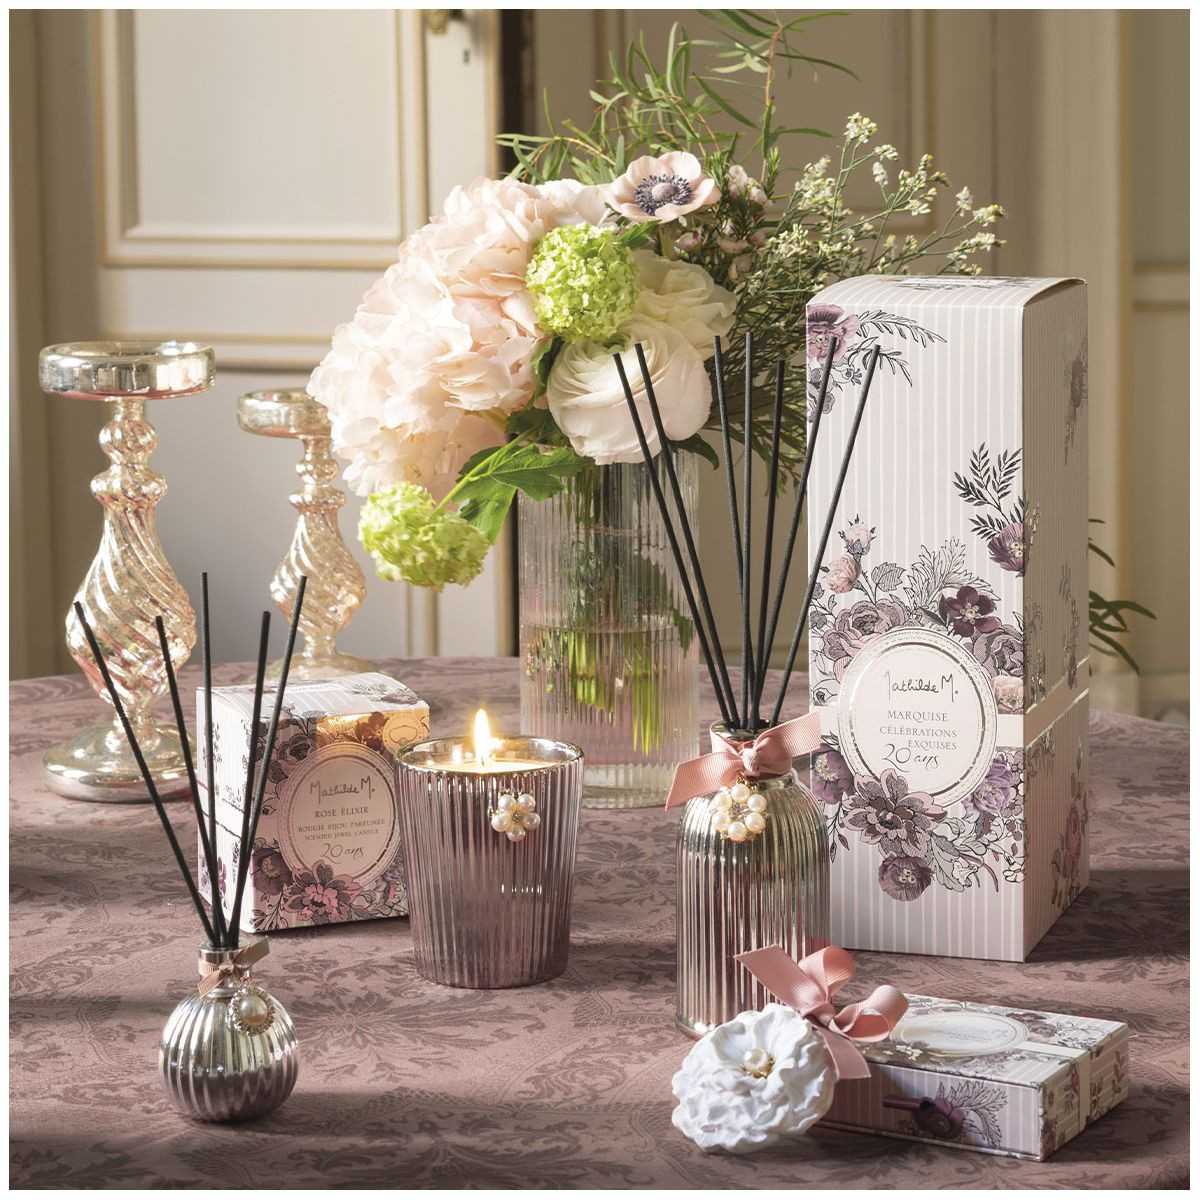 Category GIFT BOXES - INTERIEUR DECORATION :